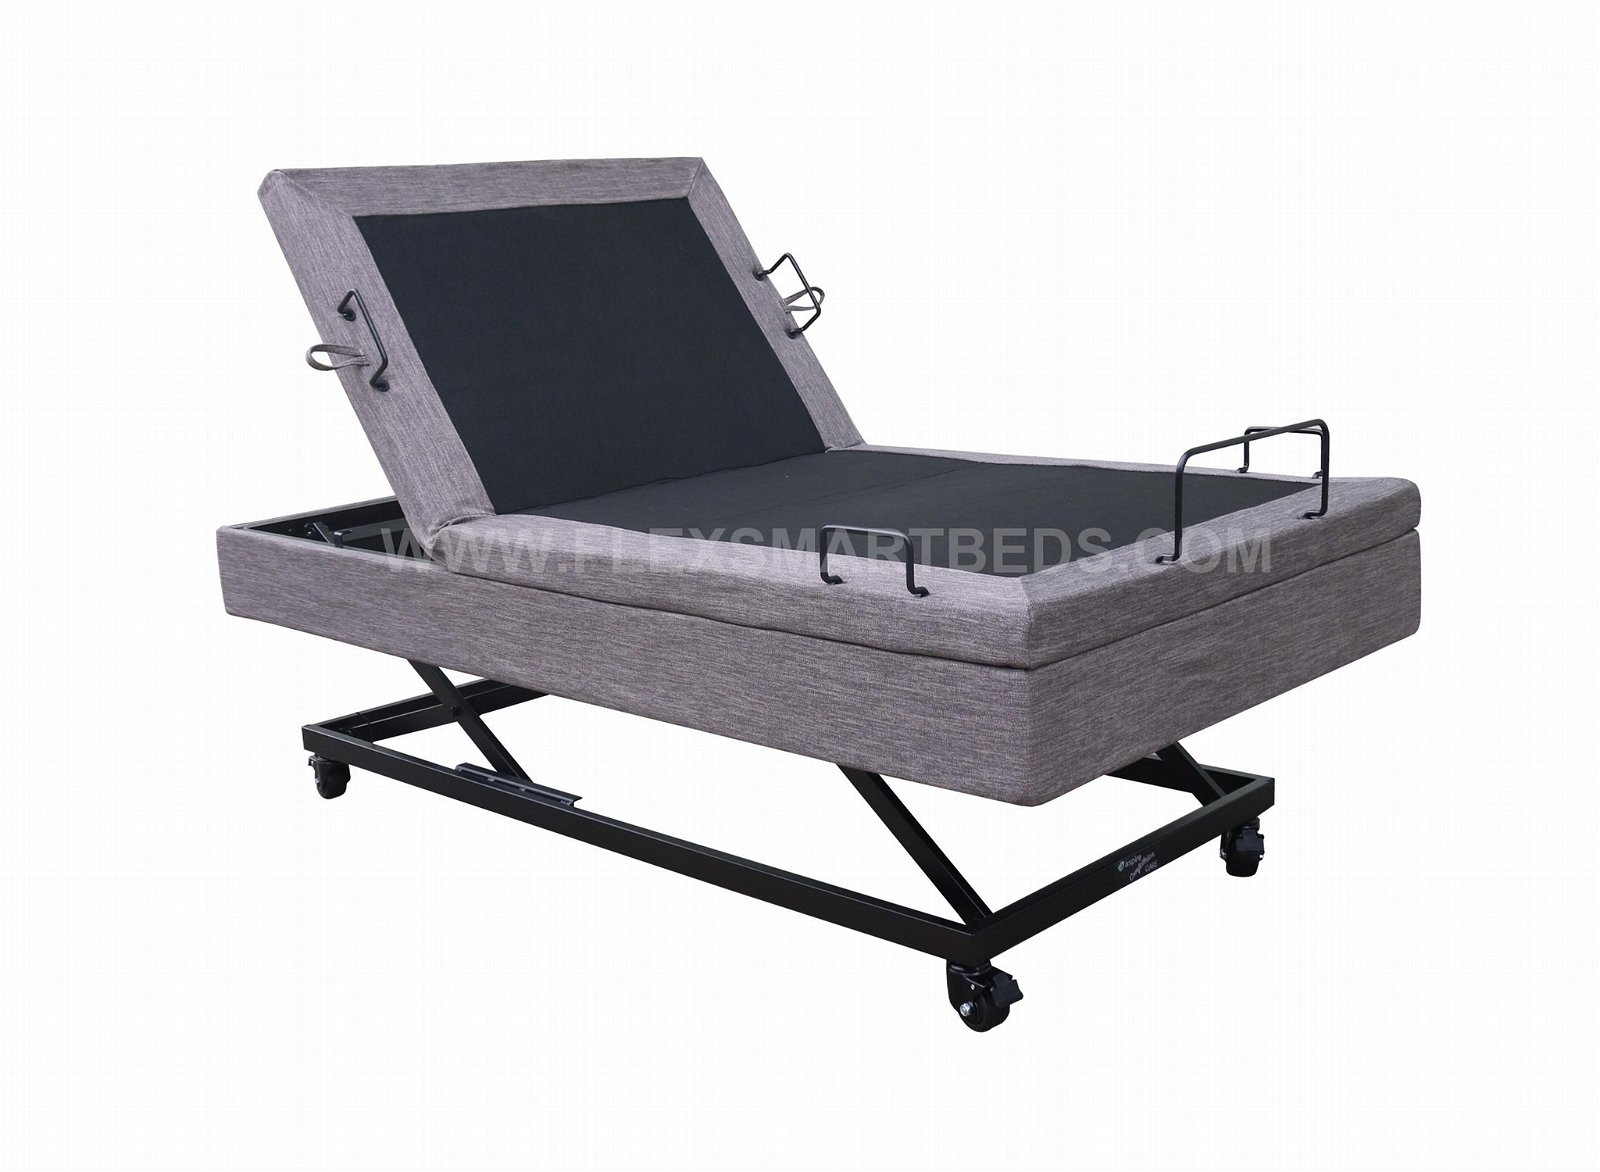 LoLo Adjustable Bed 4